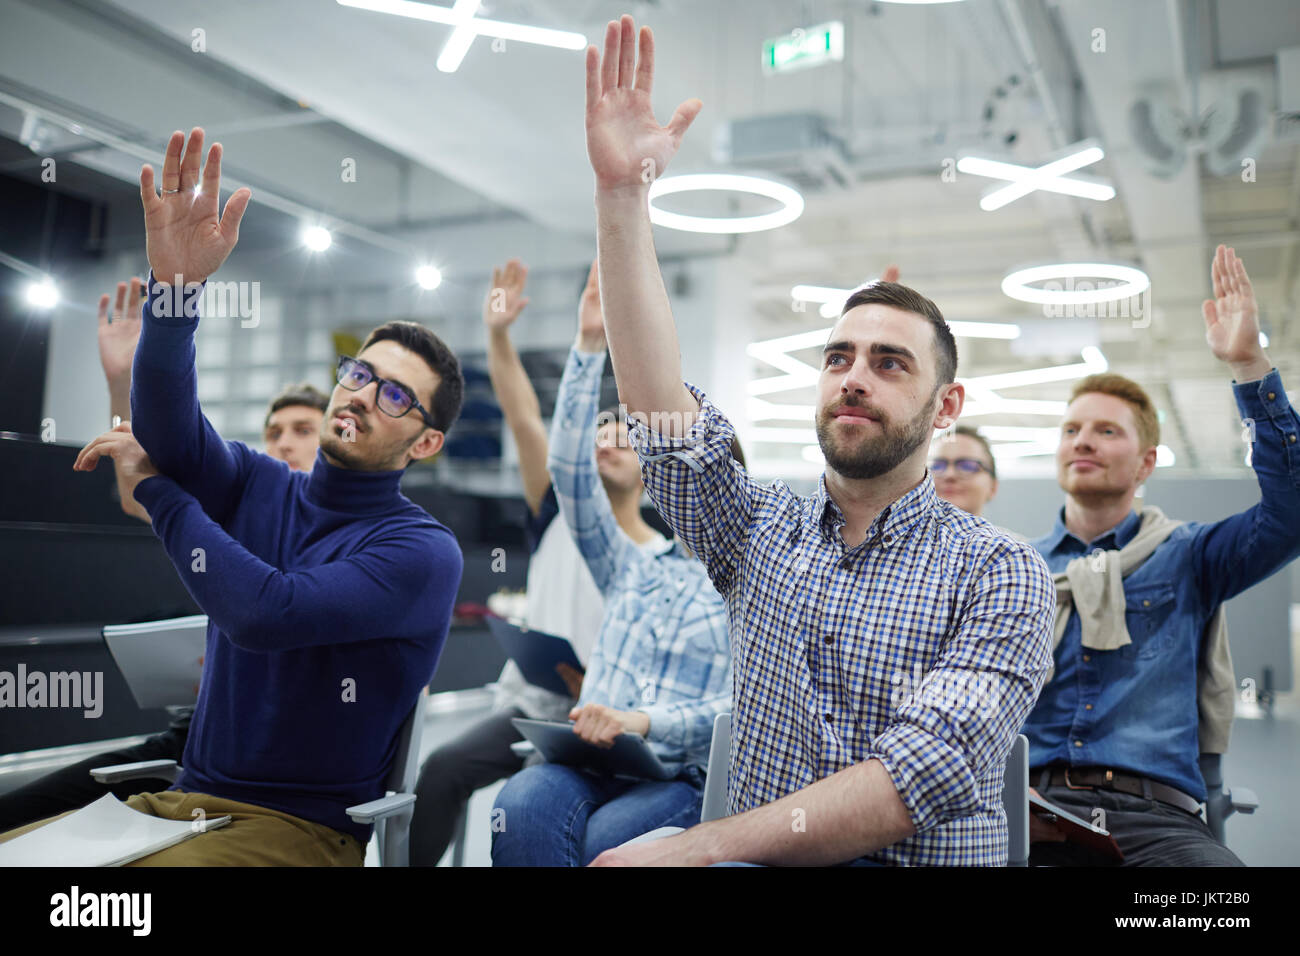 Business people voicing ideas at lesson Stock Photo